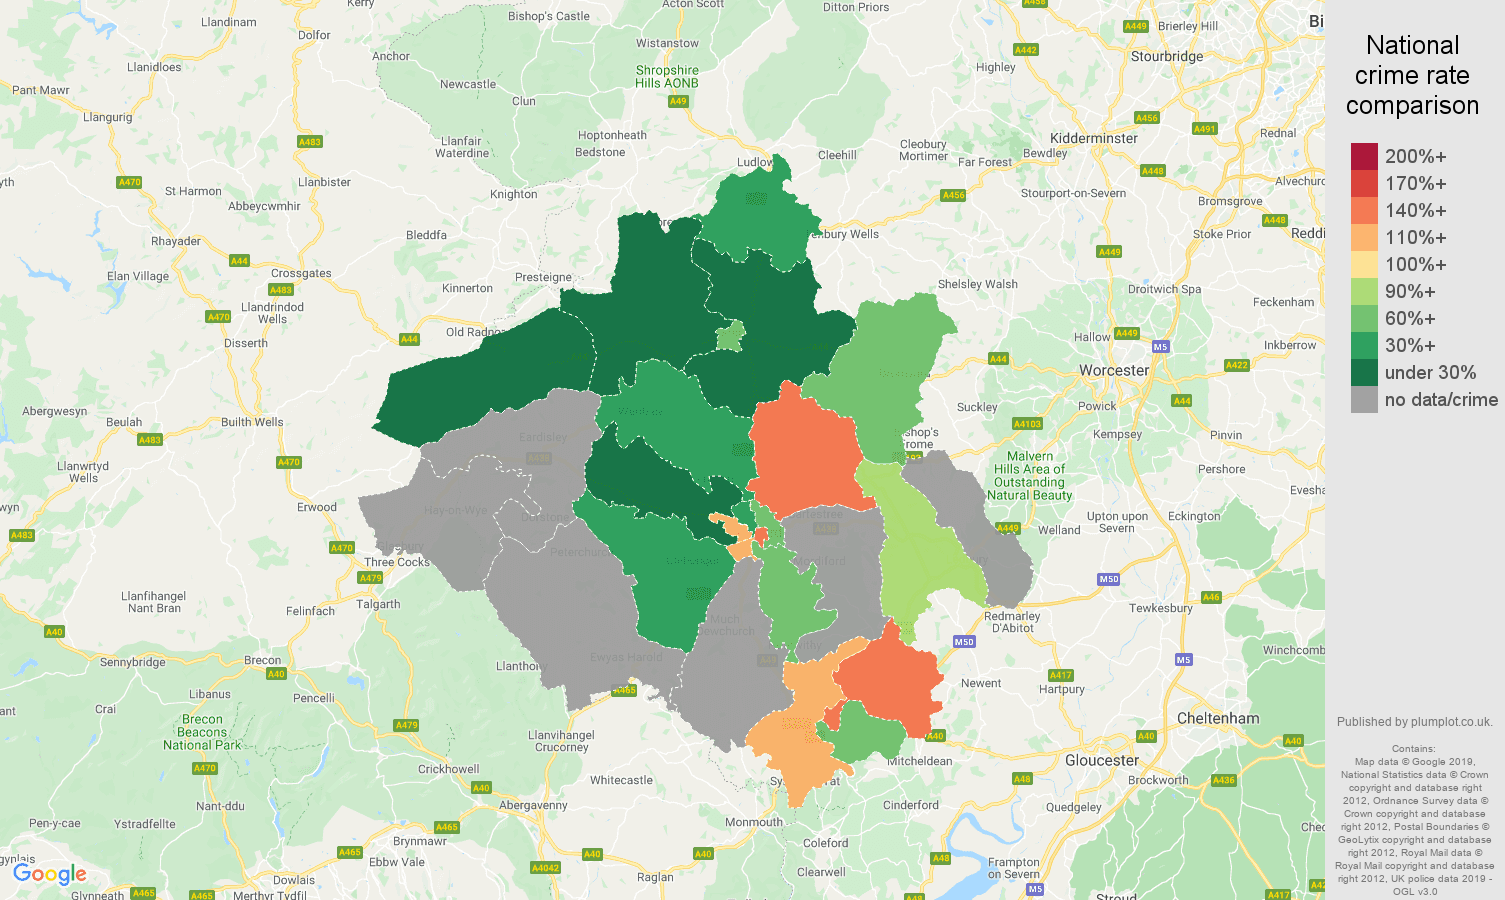 Herefordshire possession of weapons crime rate comparison map